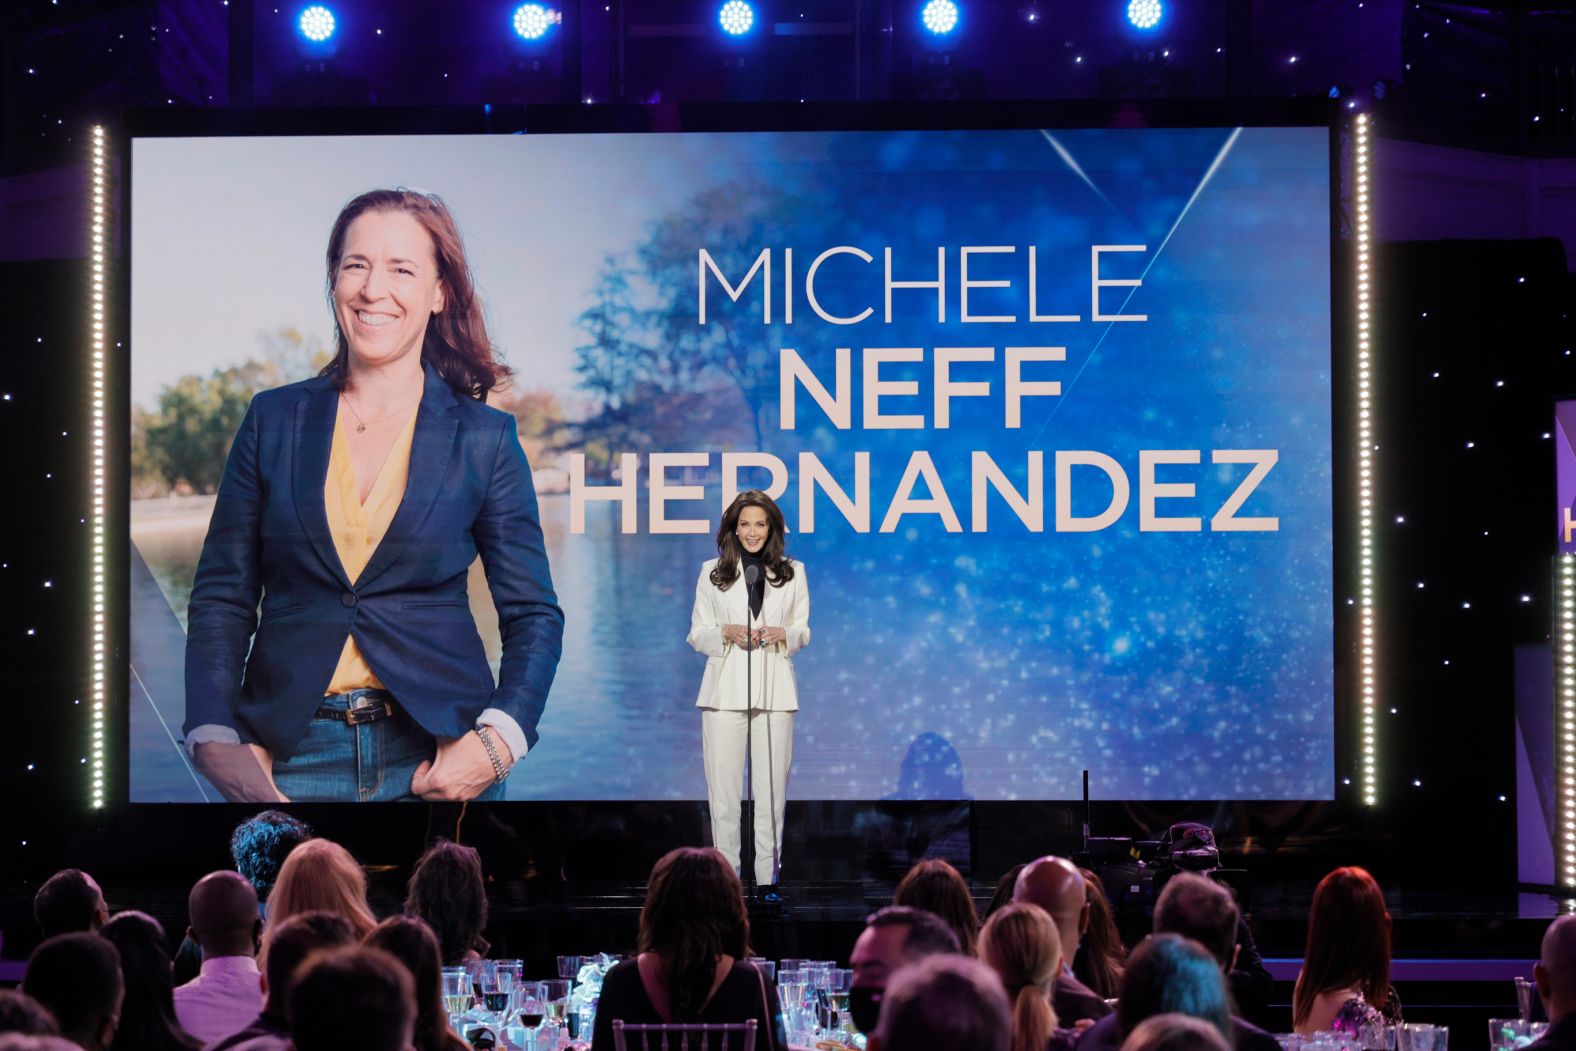 Actress and singer Lynda Carter introduces 2021 CNN Hero Michele Neff Hernandez. Her non-profit, <a href="index.php?page=&url=https%3A%2F%2Fsoaringspirits.org%2F" target="_blank" target="_blank">Soaring Spirits</a>, connects widows and widowers, allowing them to heal in a community that understands the pain of losing a partner.